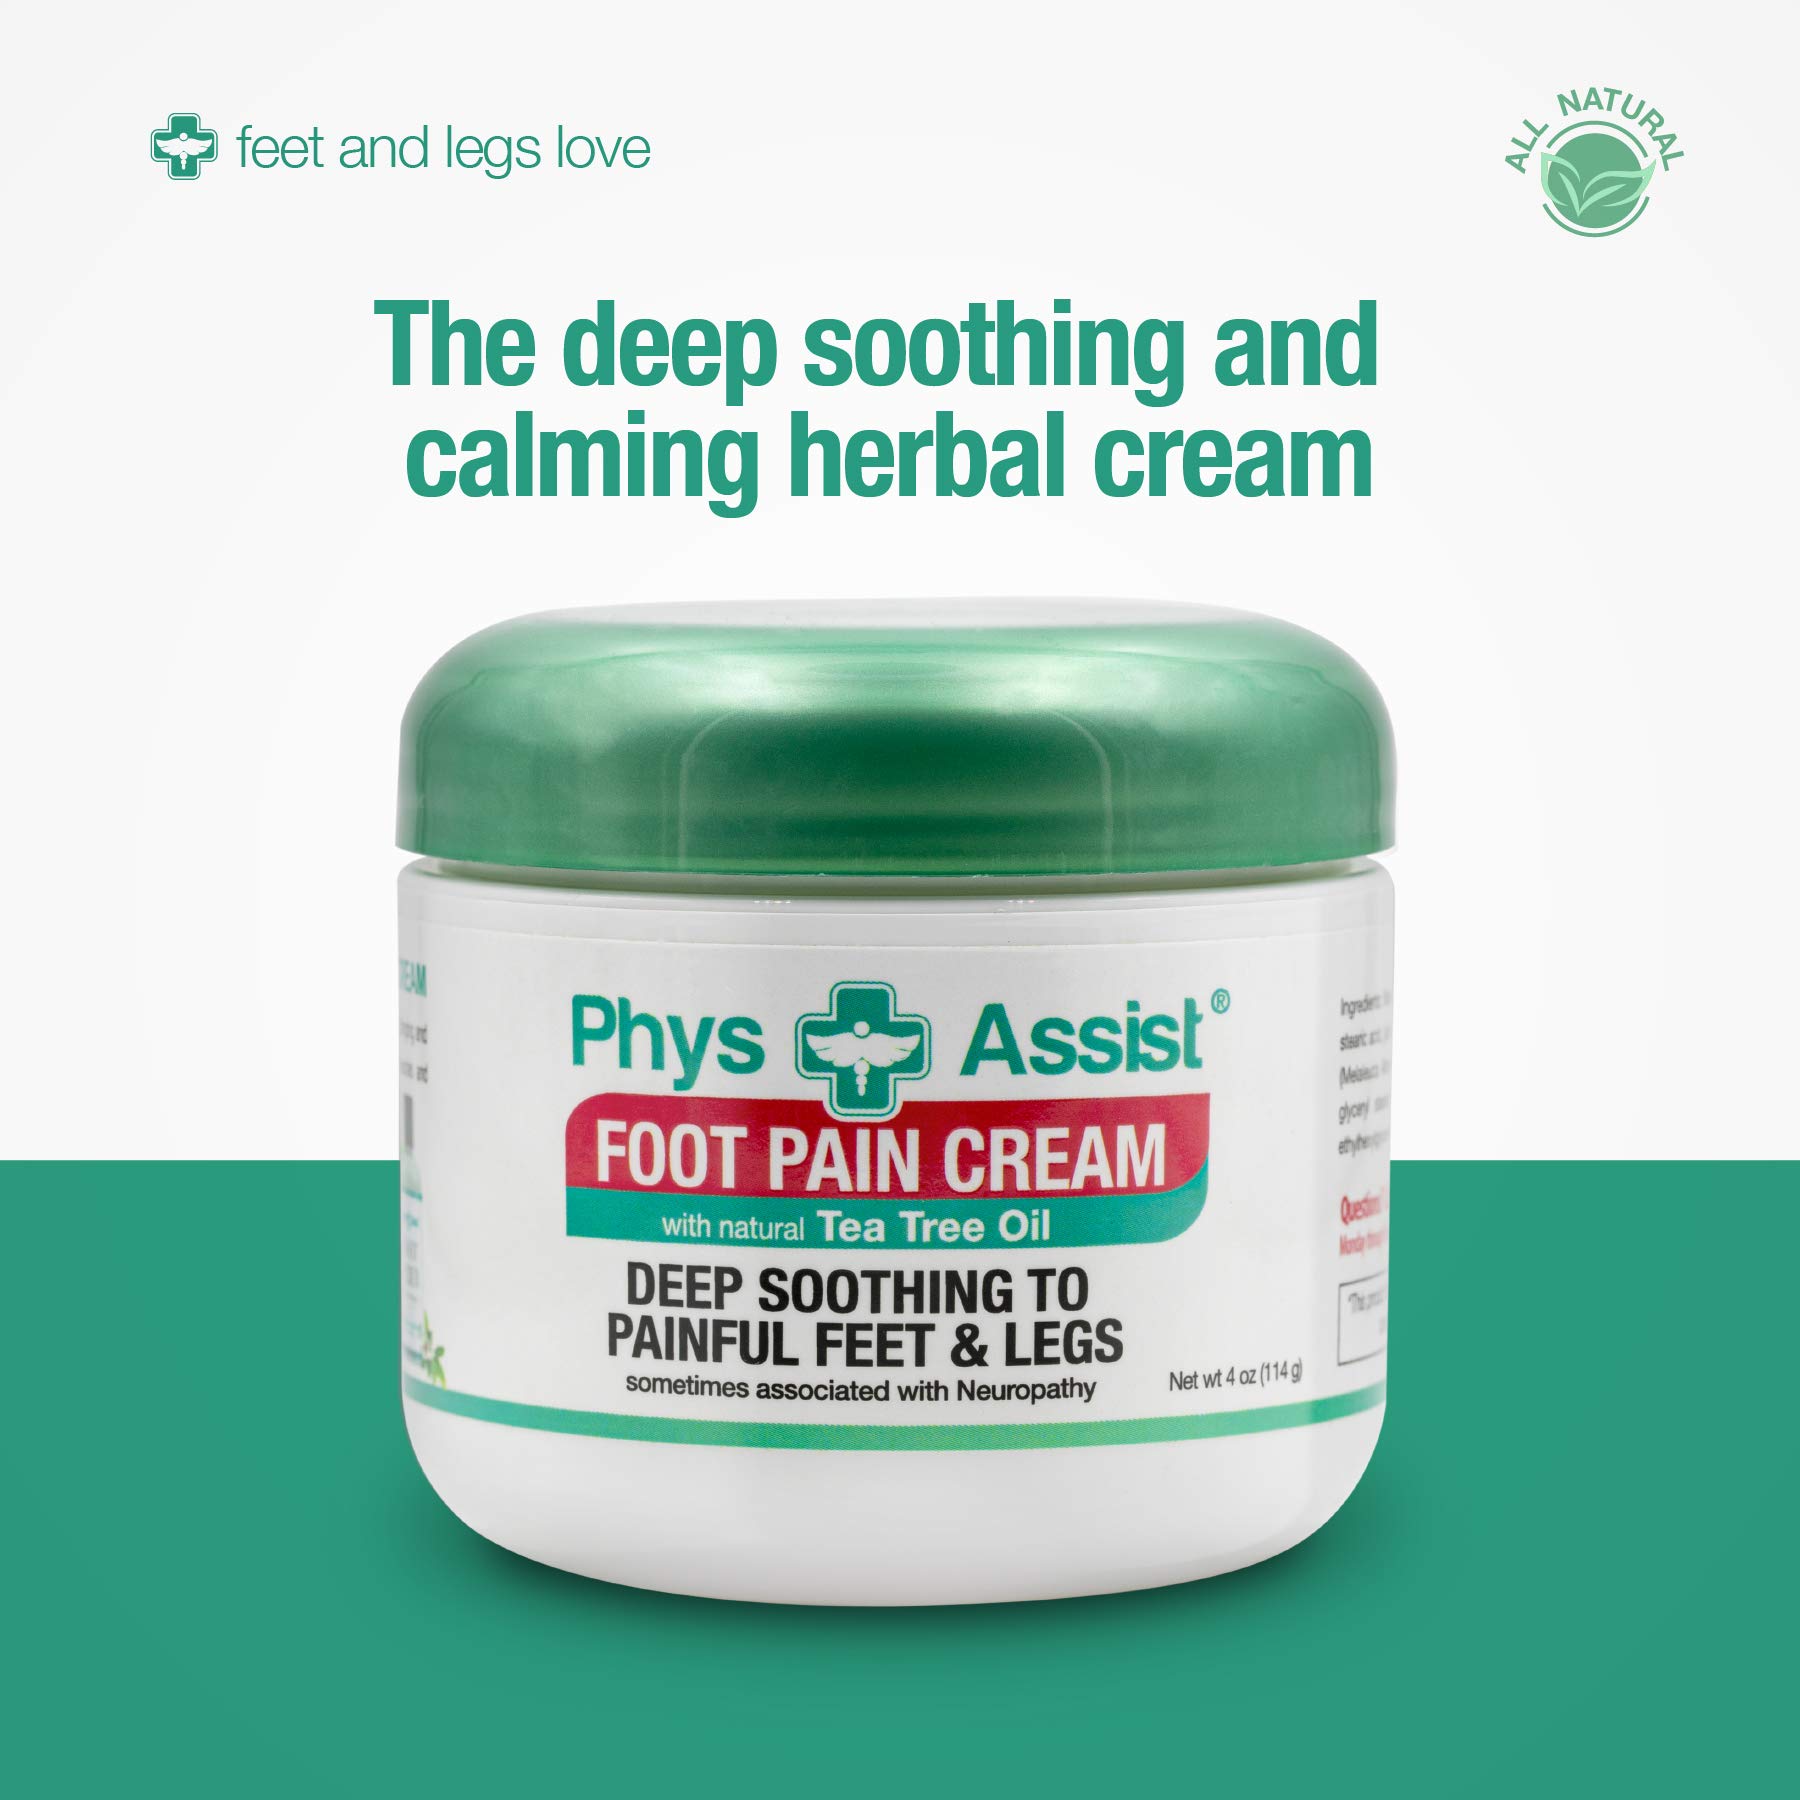 PhysAssist Foot Pain Cream (Three - 4 oz jars) Soothing to feet and Legs.